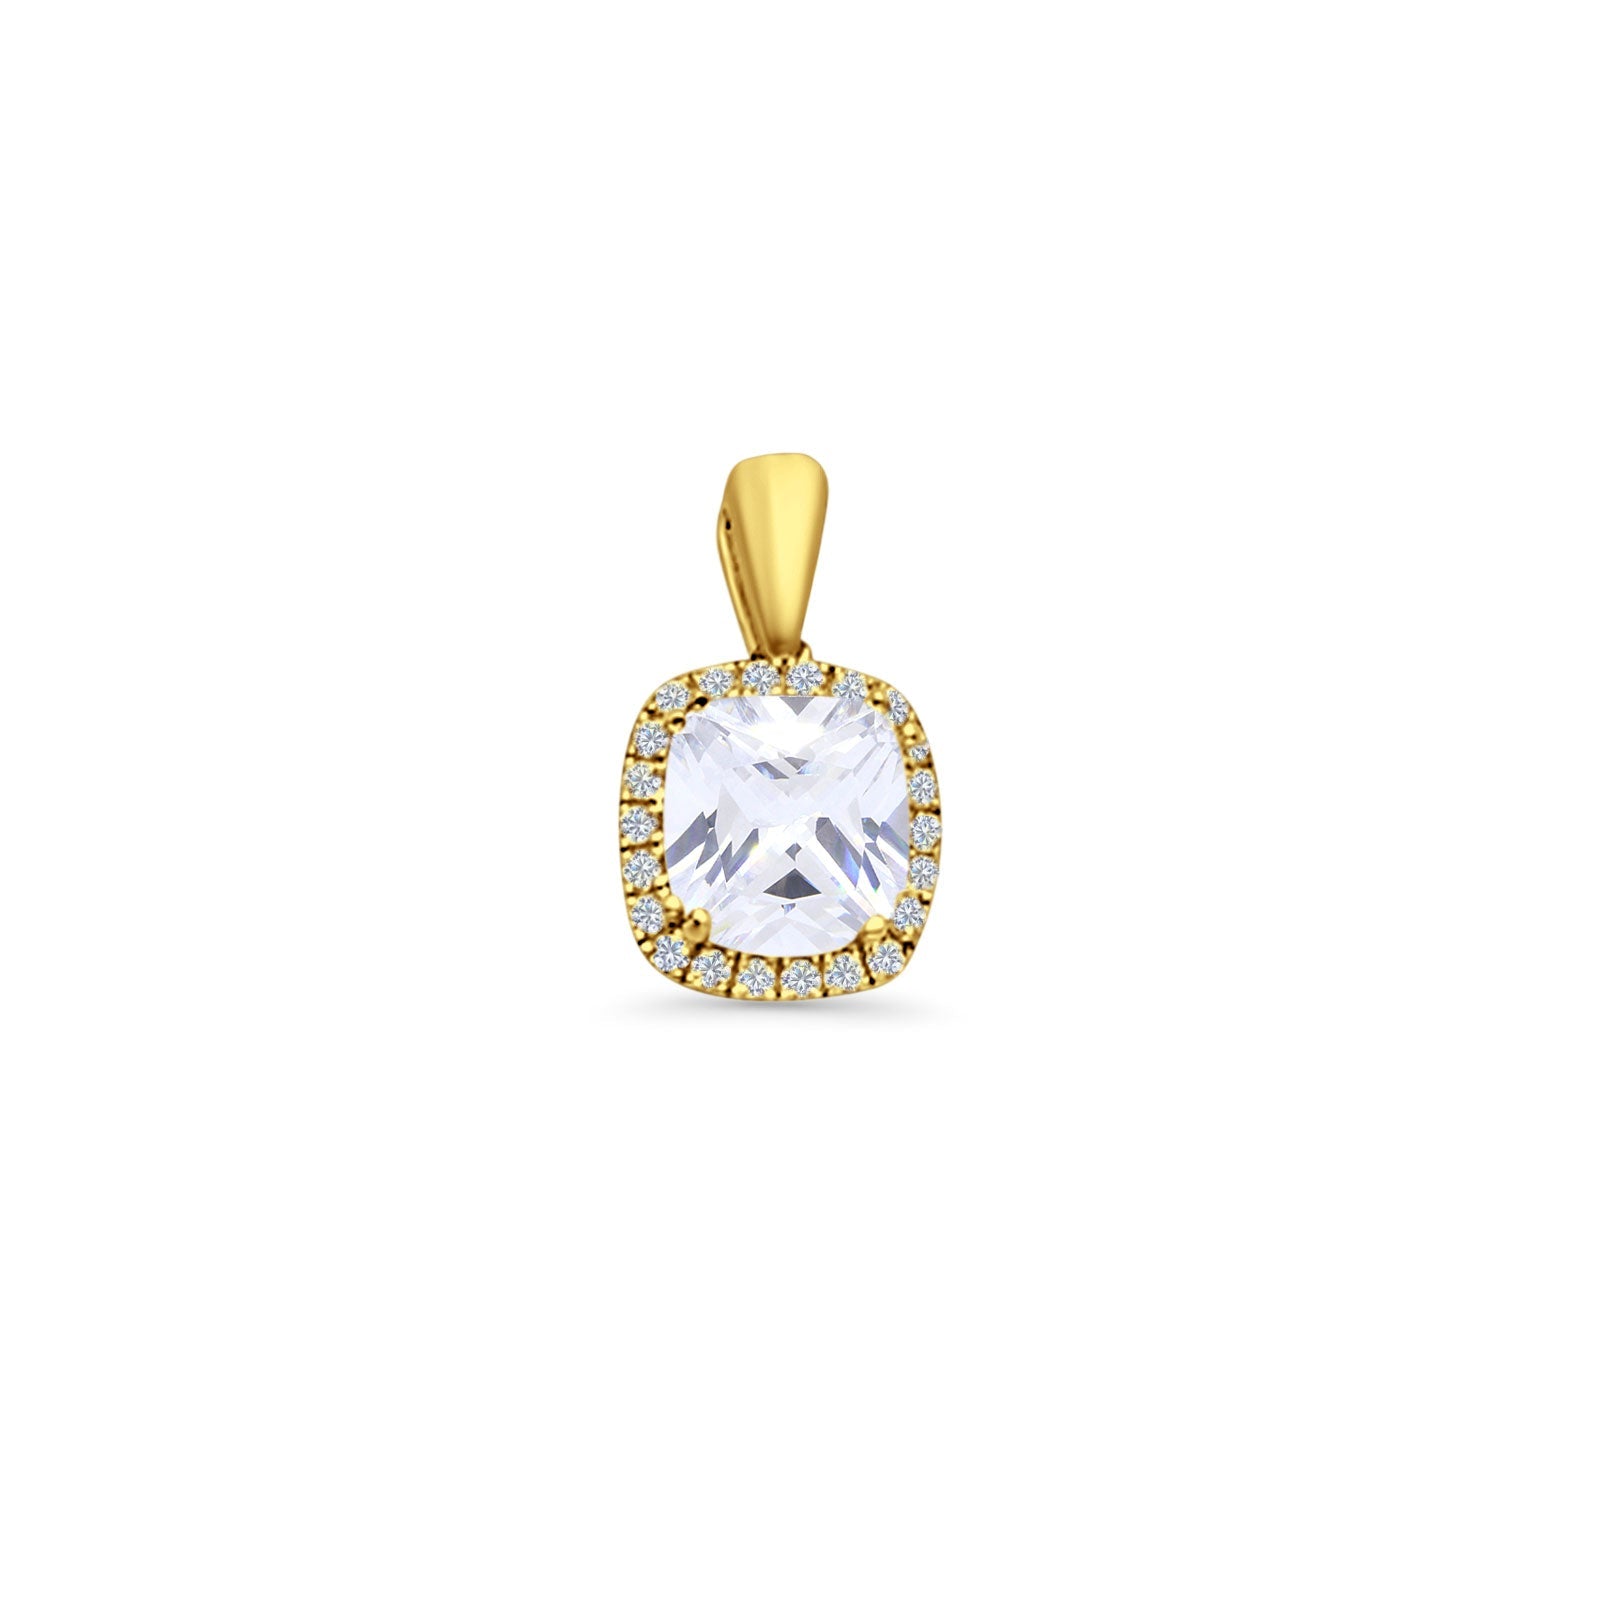 14K Yellow Gold Cushion Cut Cubic Zirconia Pendant 13mmX8mm With 16 Inch To 24 Inch 0.6MM Width Box Chain Necklace